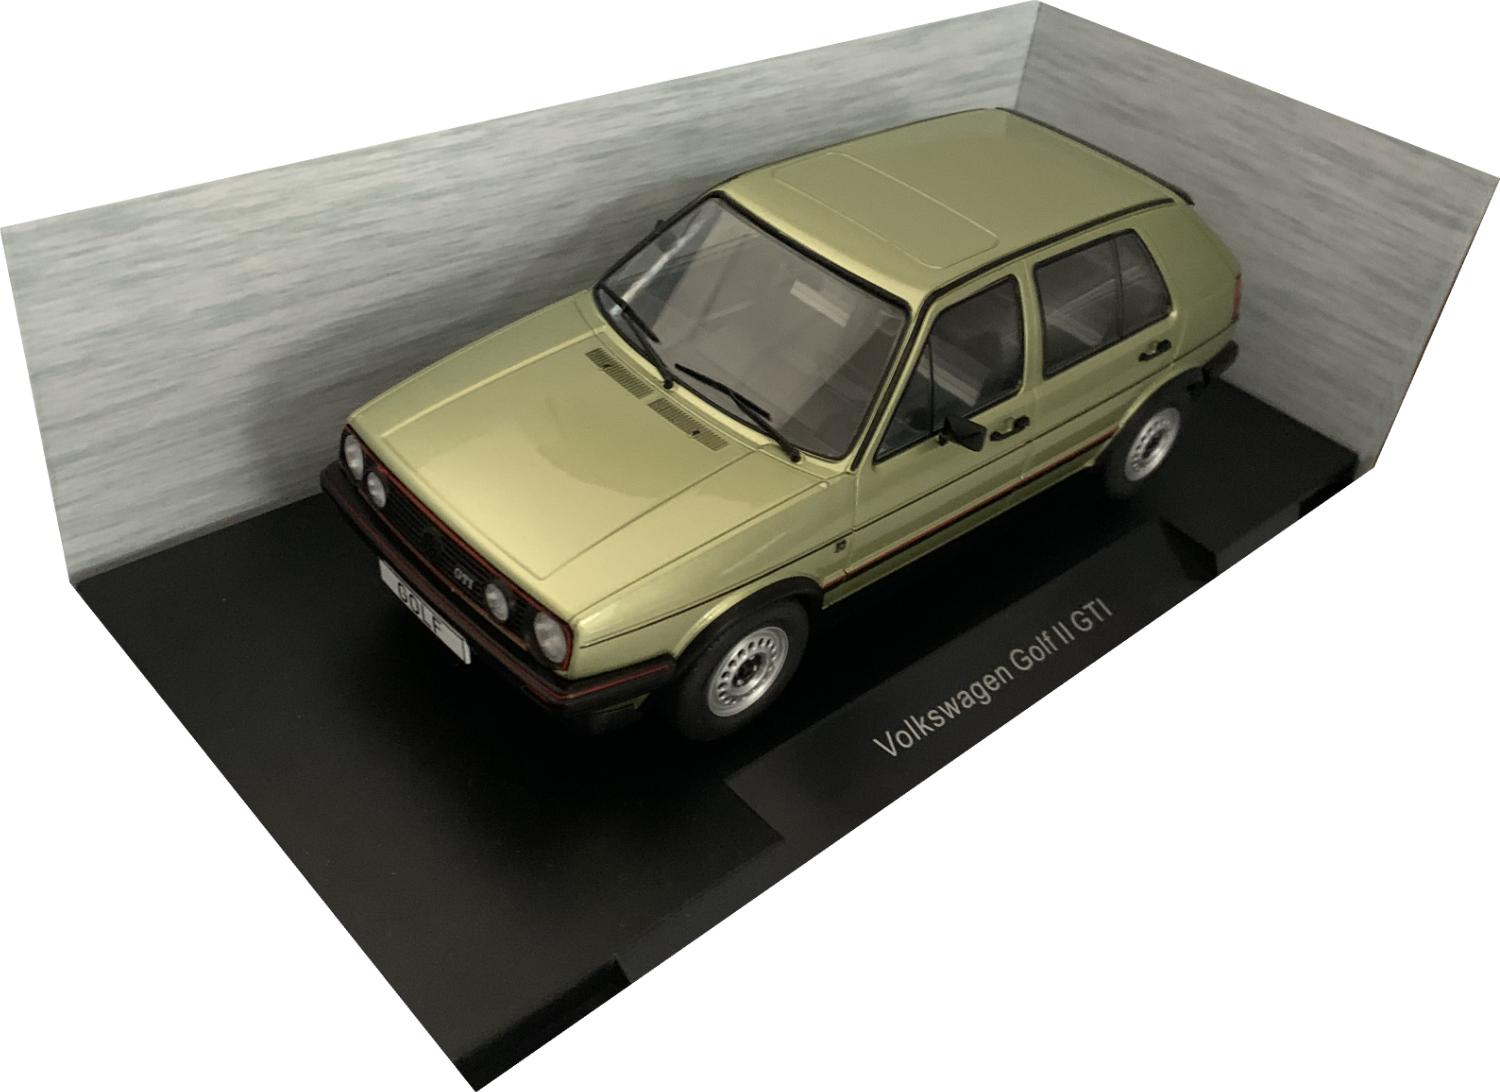 A very good representation of the VW Golf II GTI from 1984 decorated in metallic green with rear top spoiler, silver and black wheels